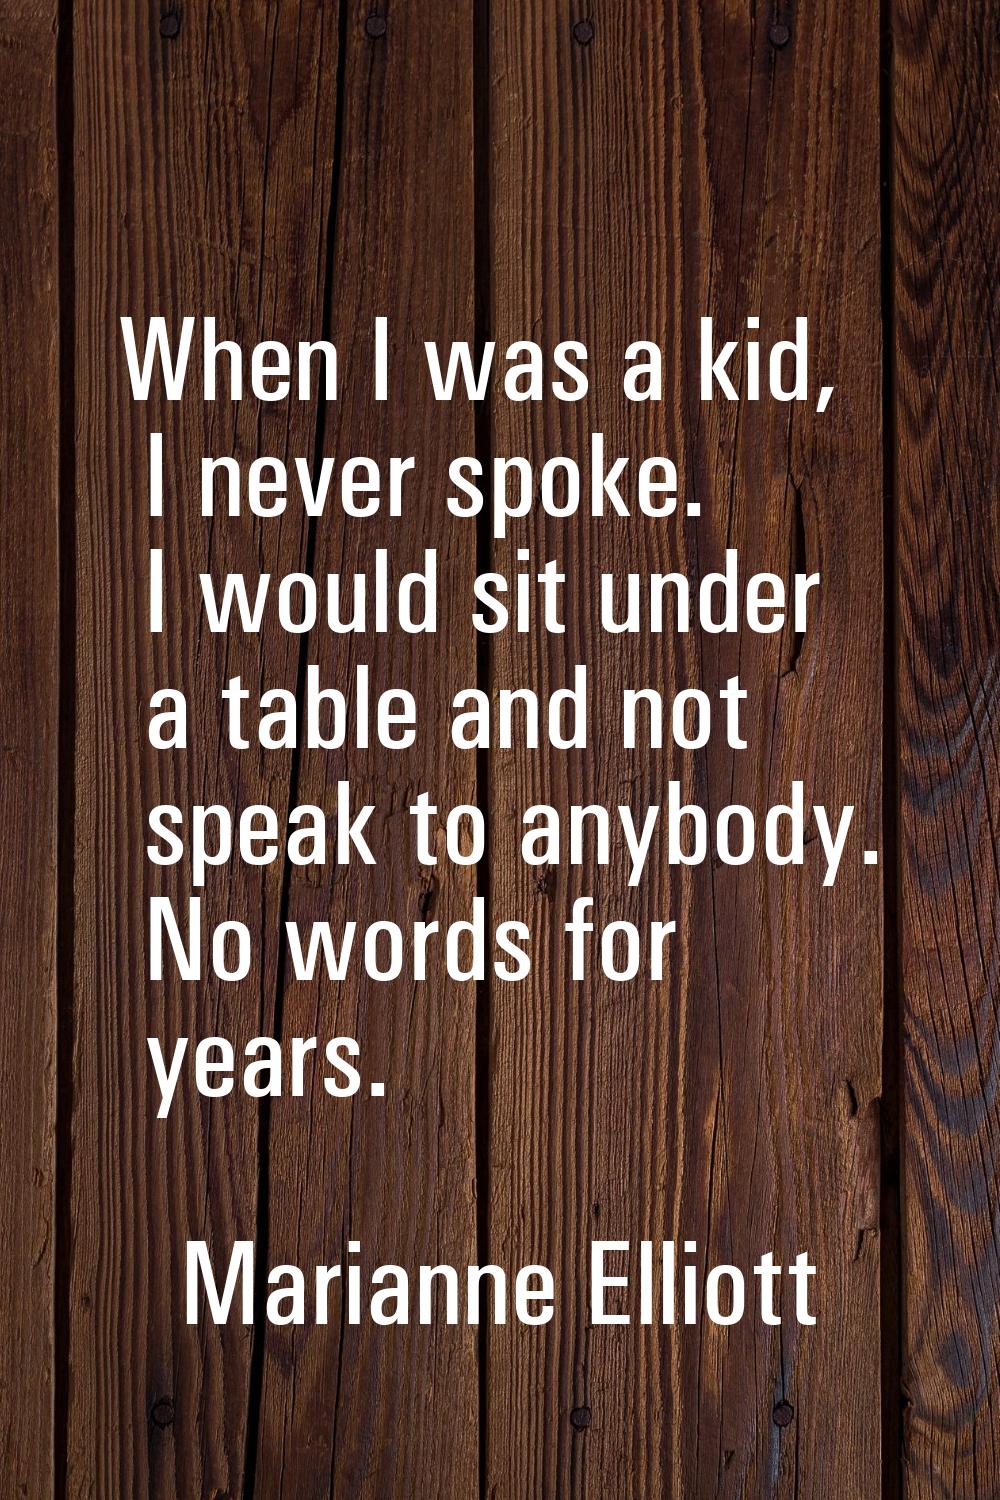 When I was a kid, I never spoke. I would sit under a table and not speak to anybody. No words for y